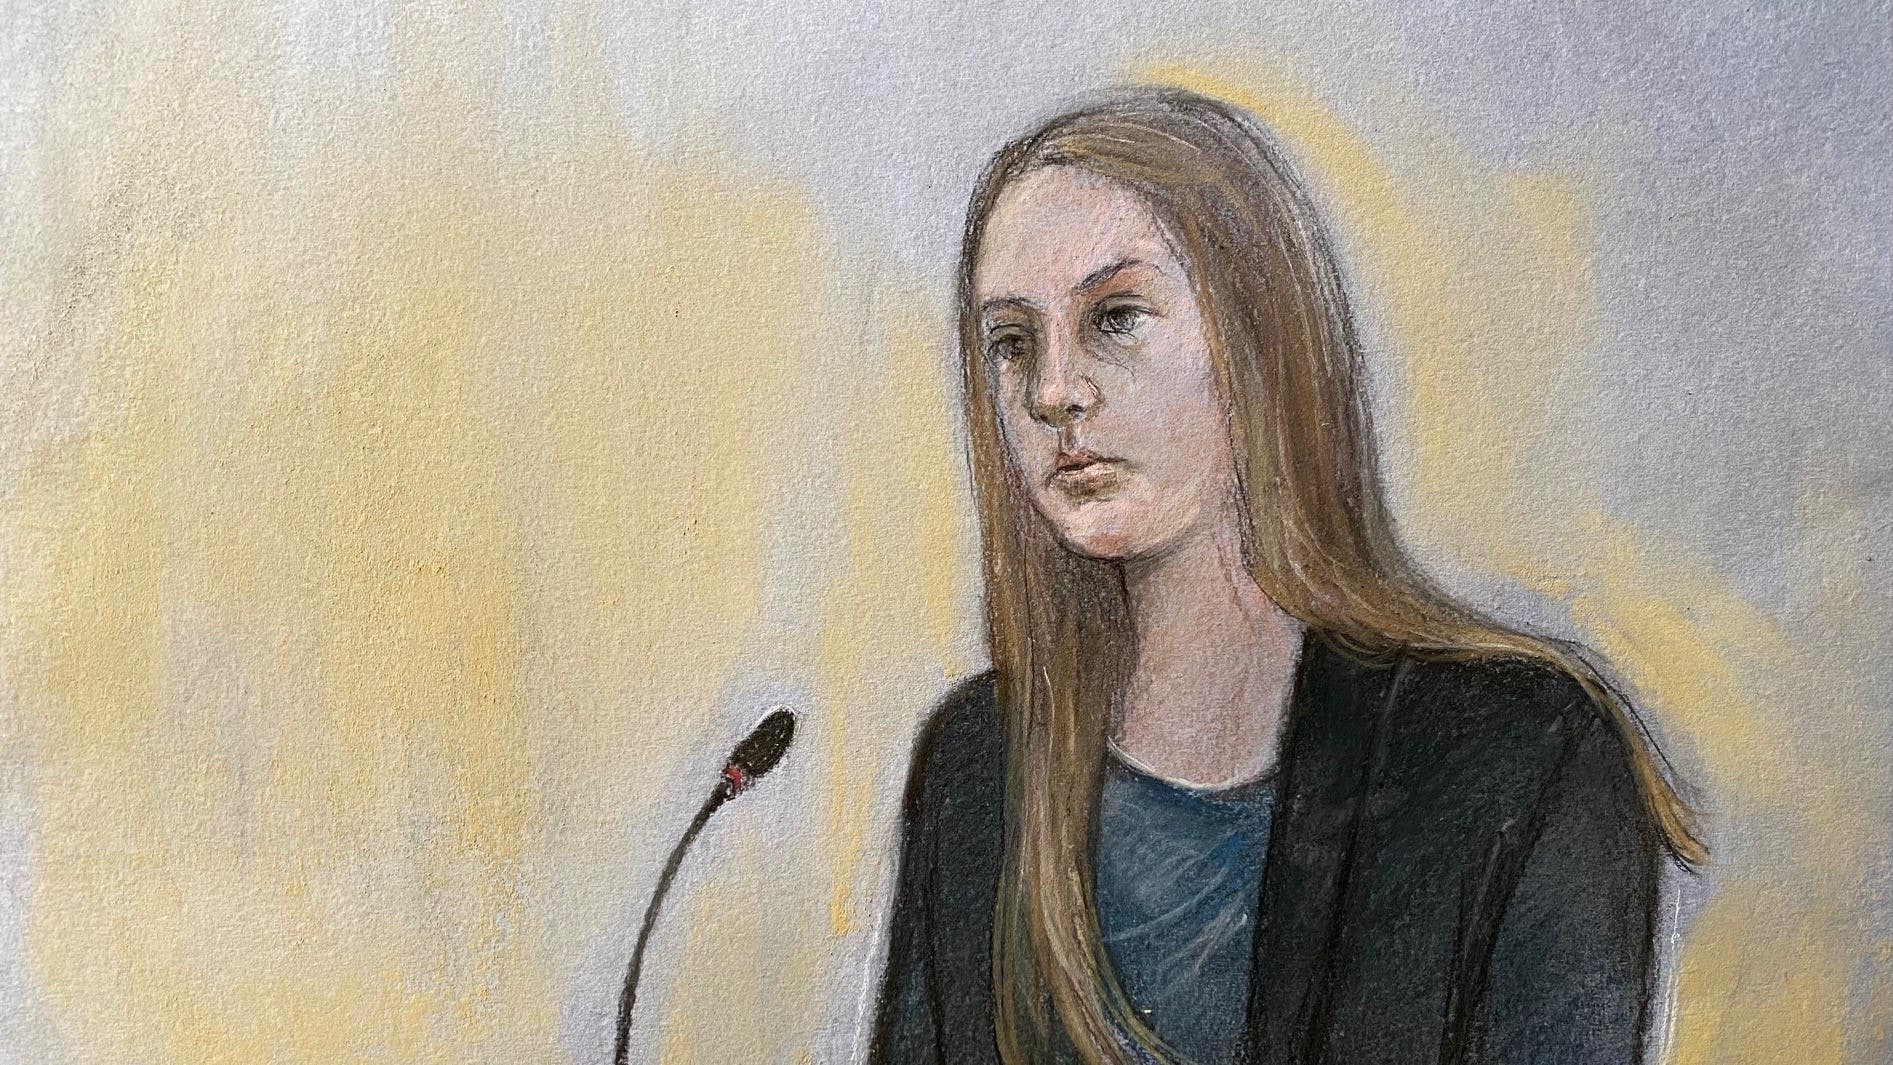 Lucy Letby tells court: ‘I am not guilty of what I was found guilty of’